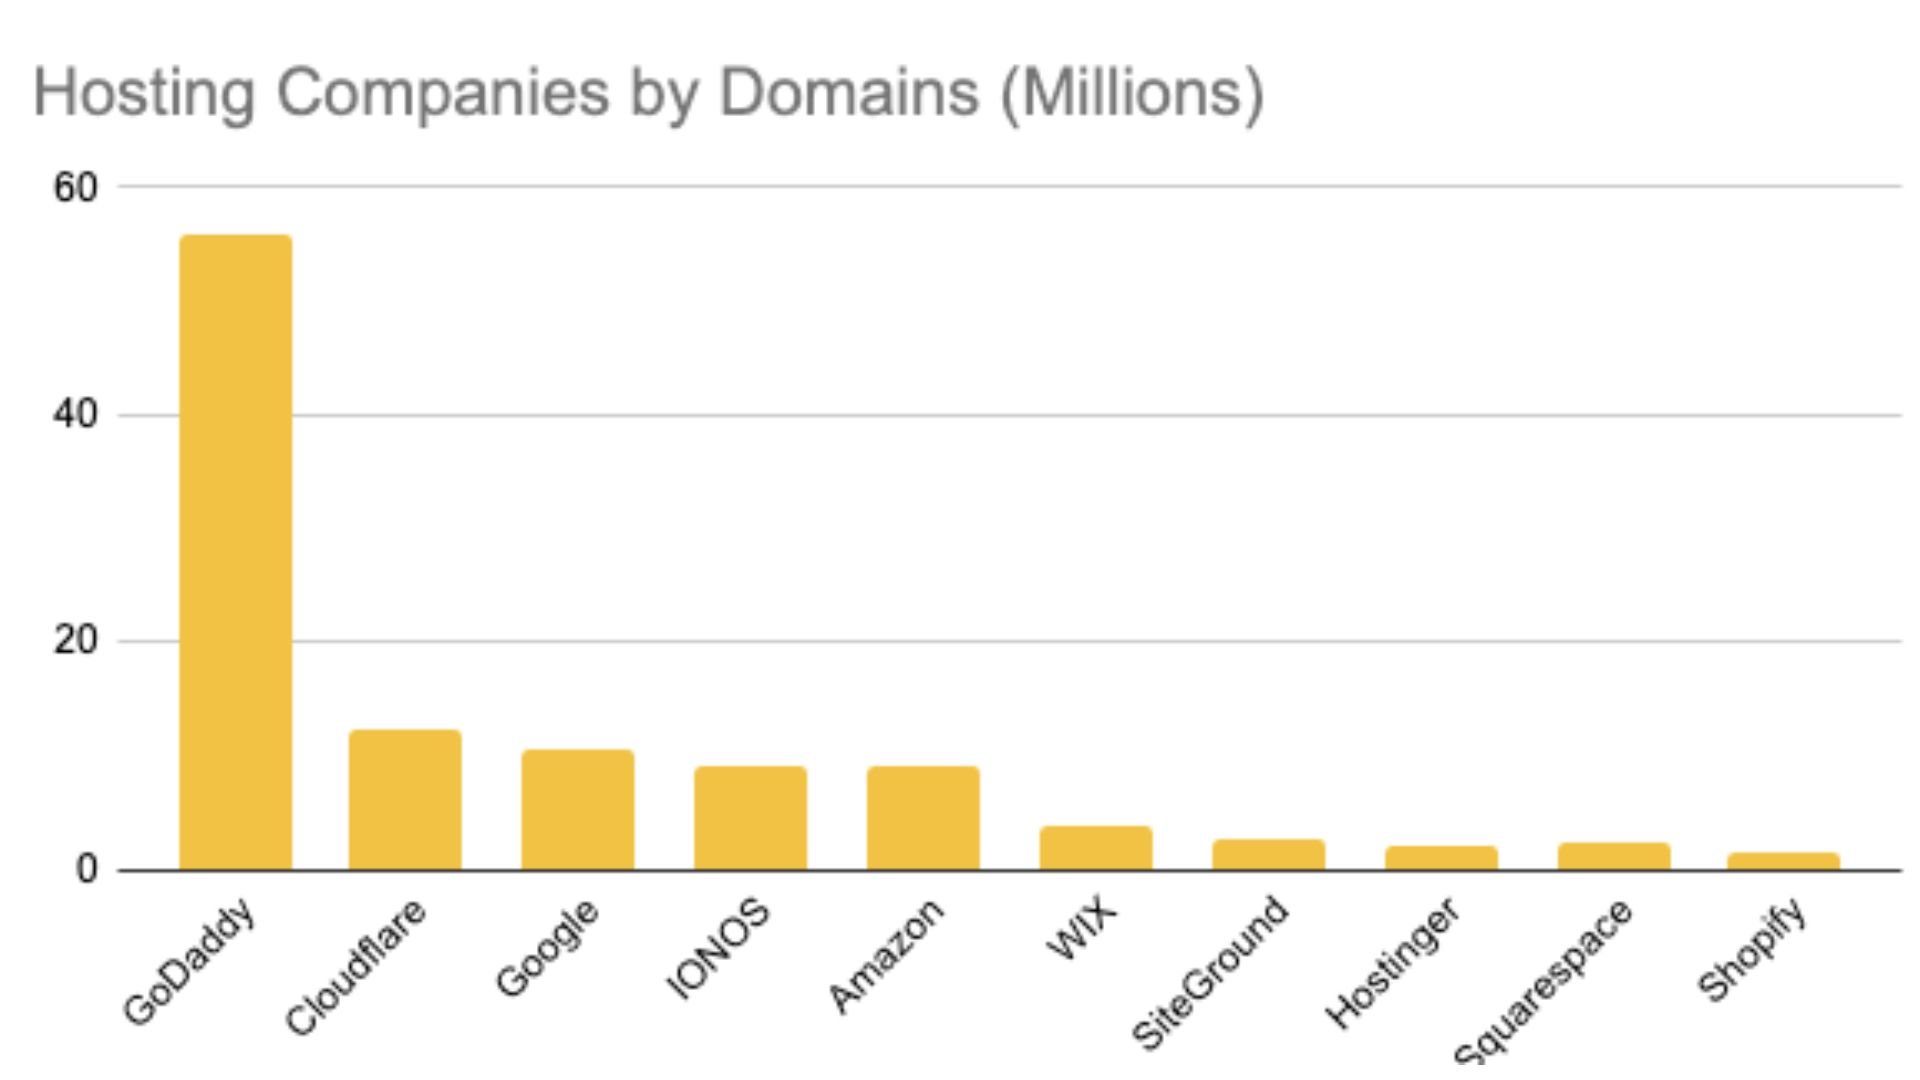 hosting companies, based on domains